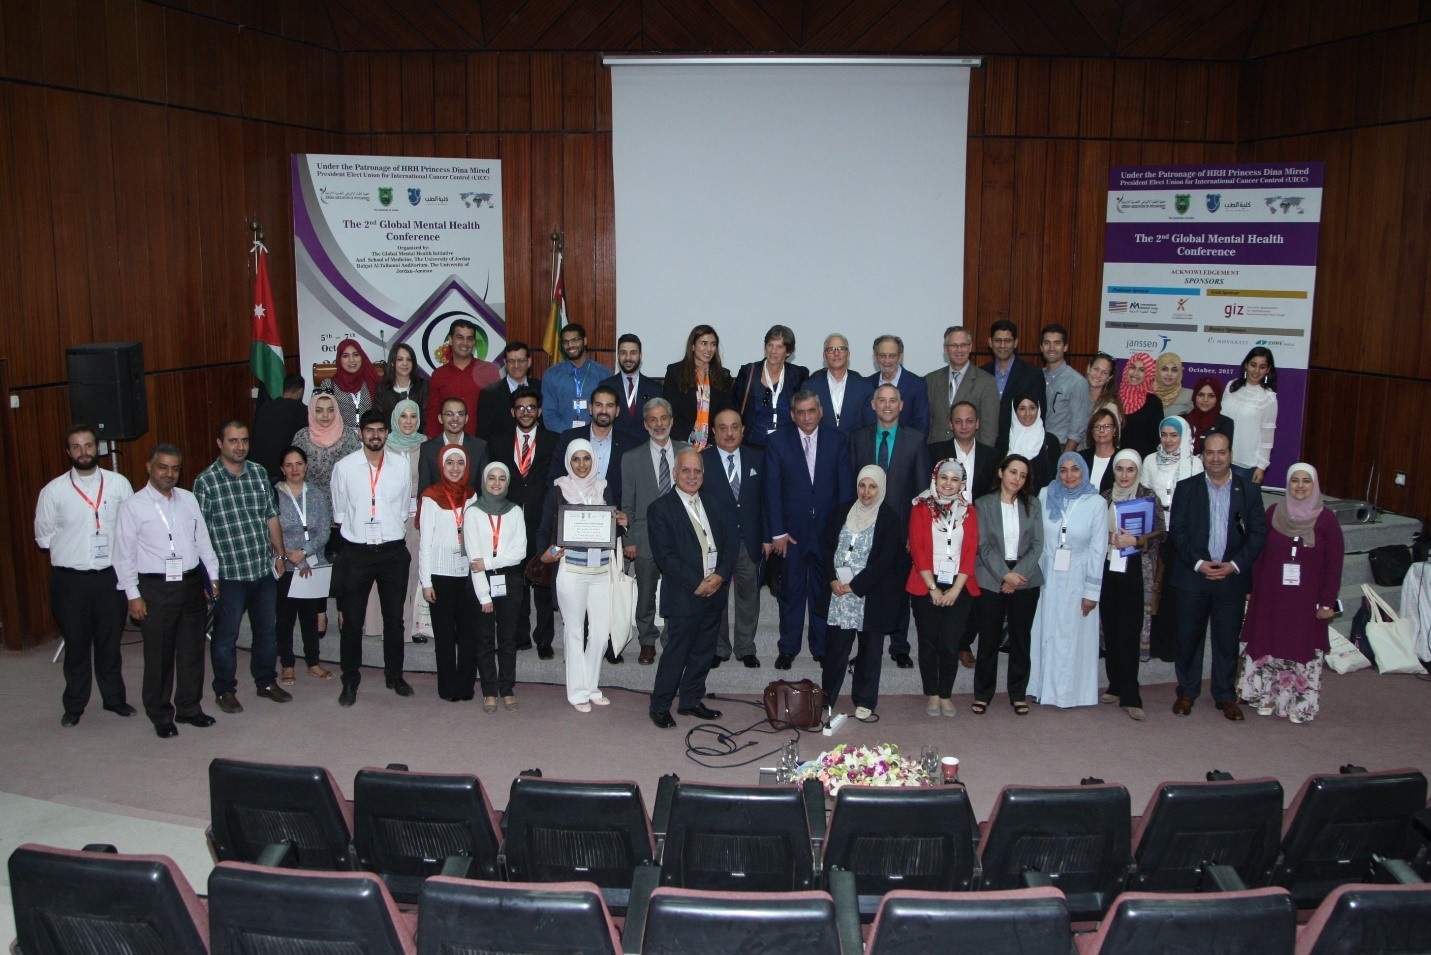 Group picture of organizers, speakers, and foreign guests of the 2017 conference